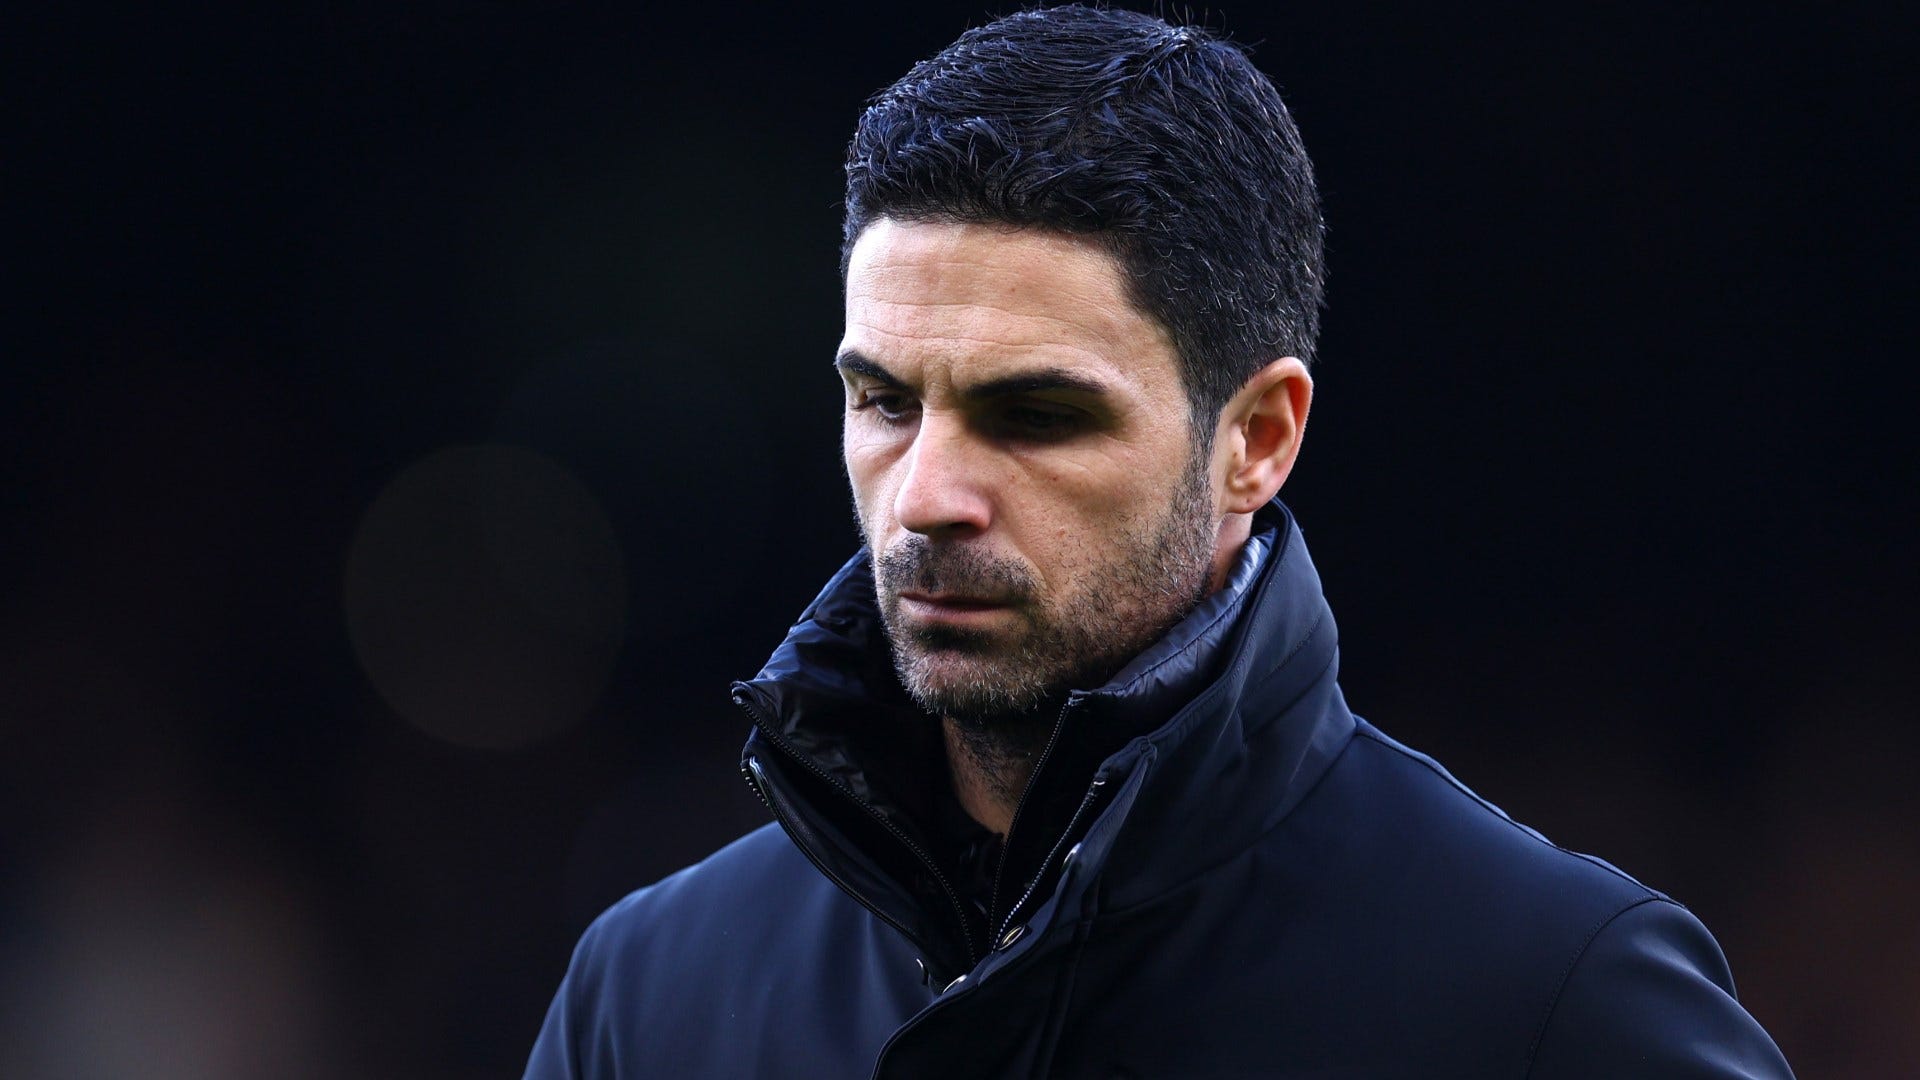 Mikel Arteta to take the Jurgen Klopp route?! Shocking new report claims Arsenal boss is considering stepping down in the summer amid links with Barcelona thumbnail